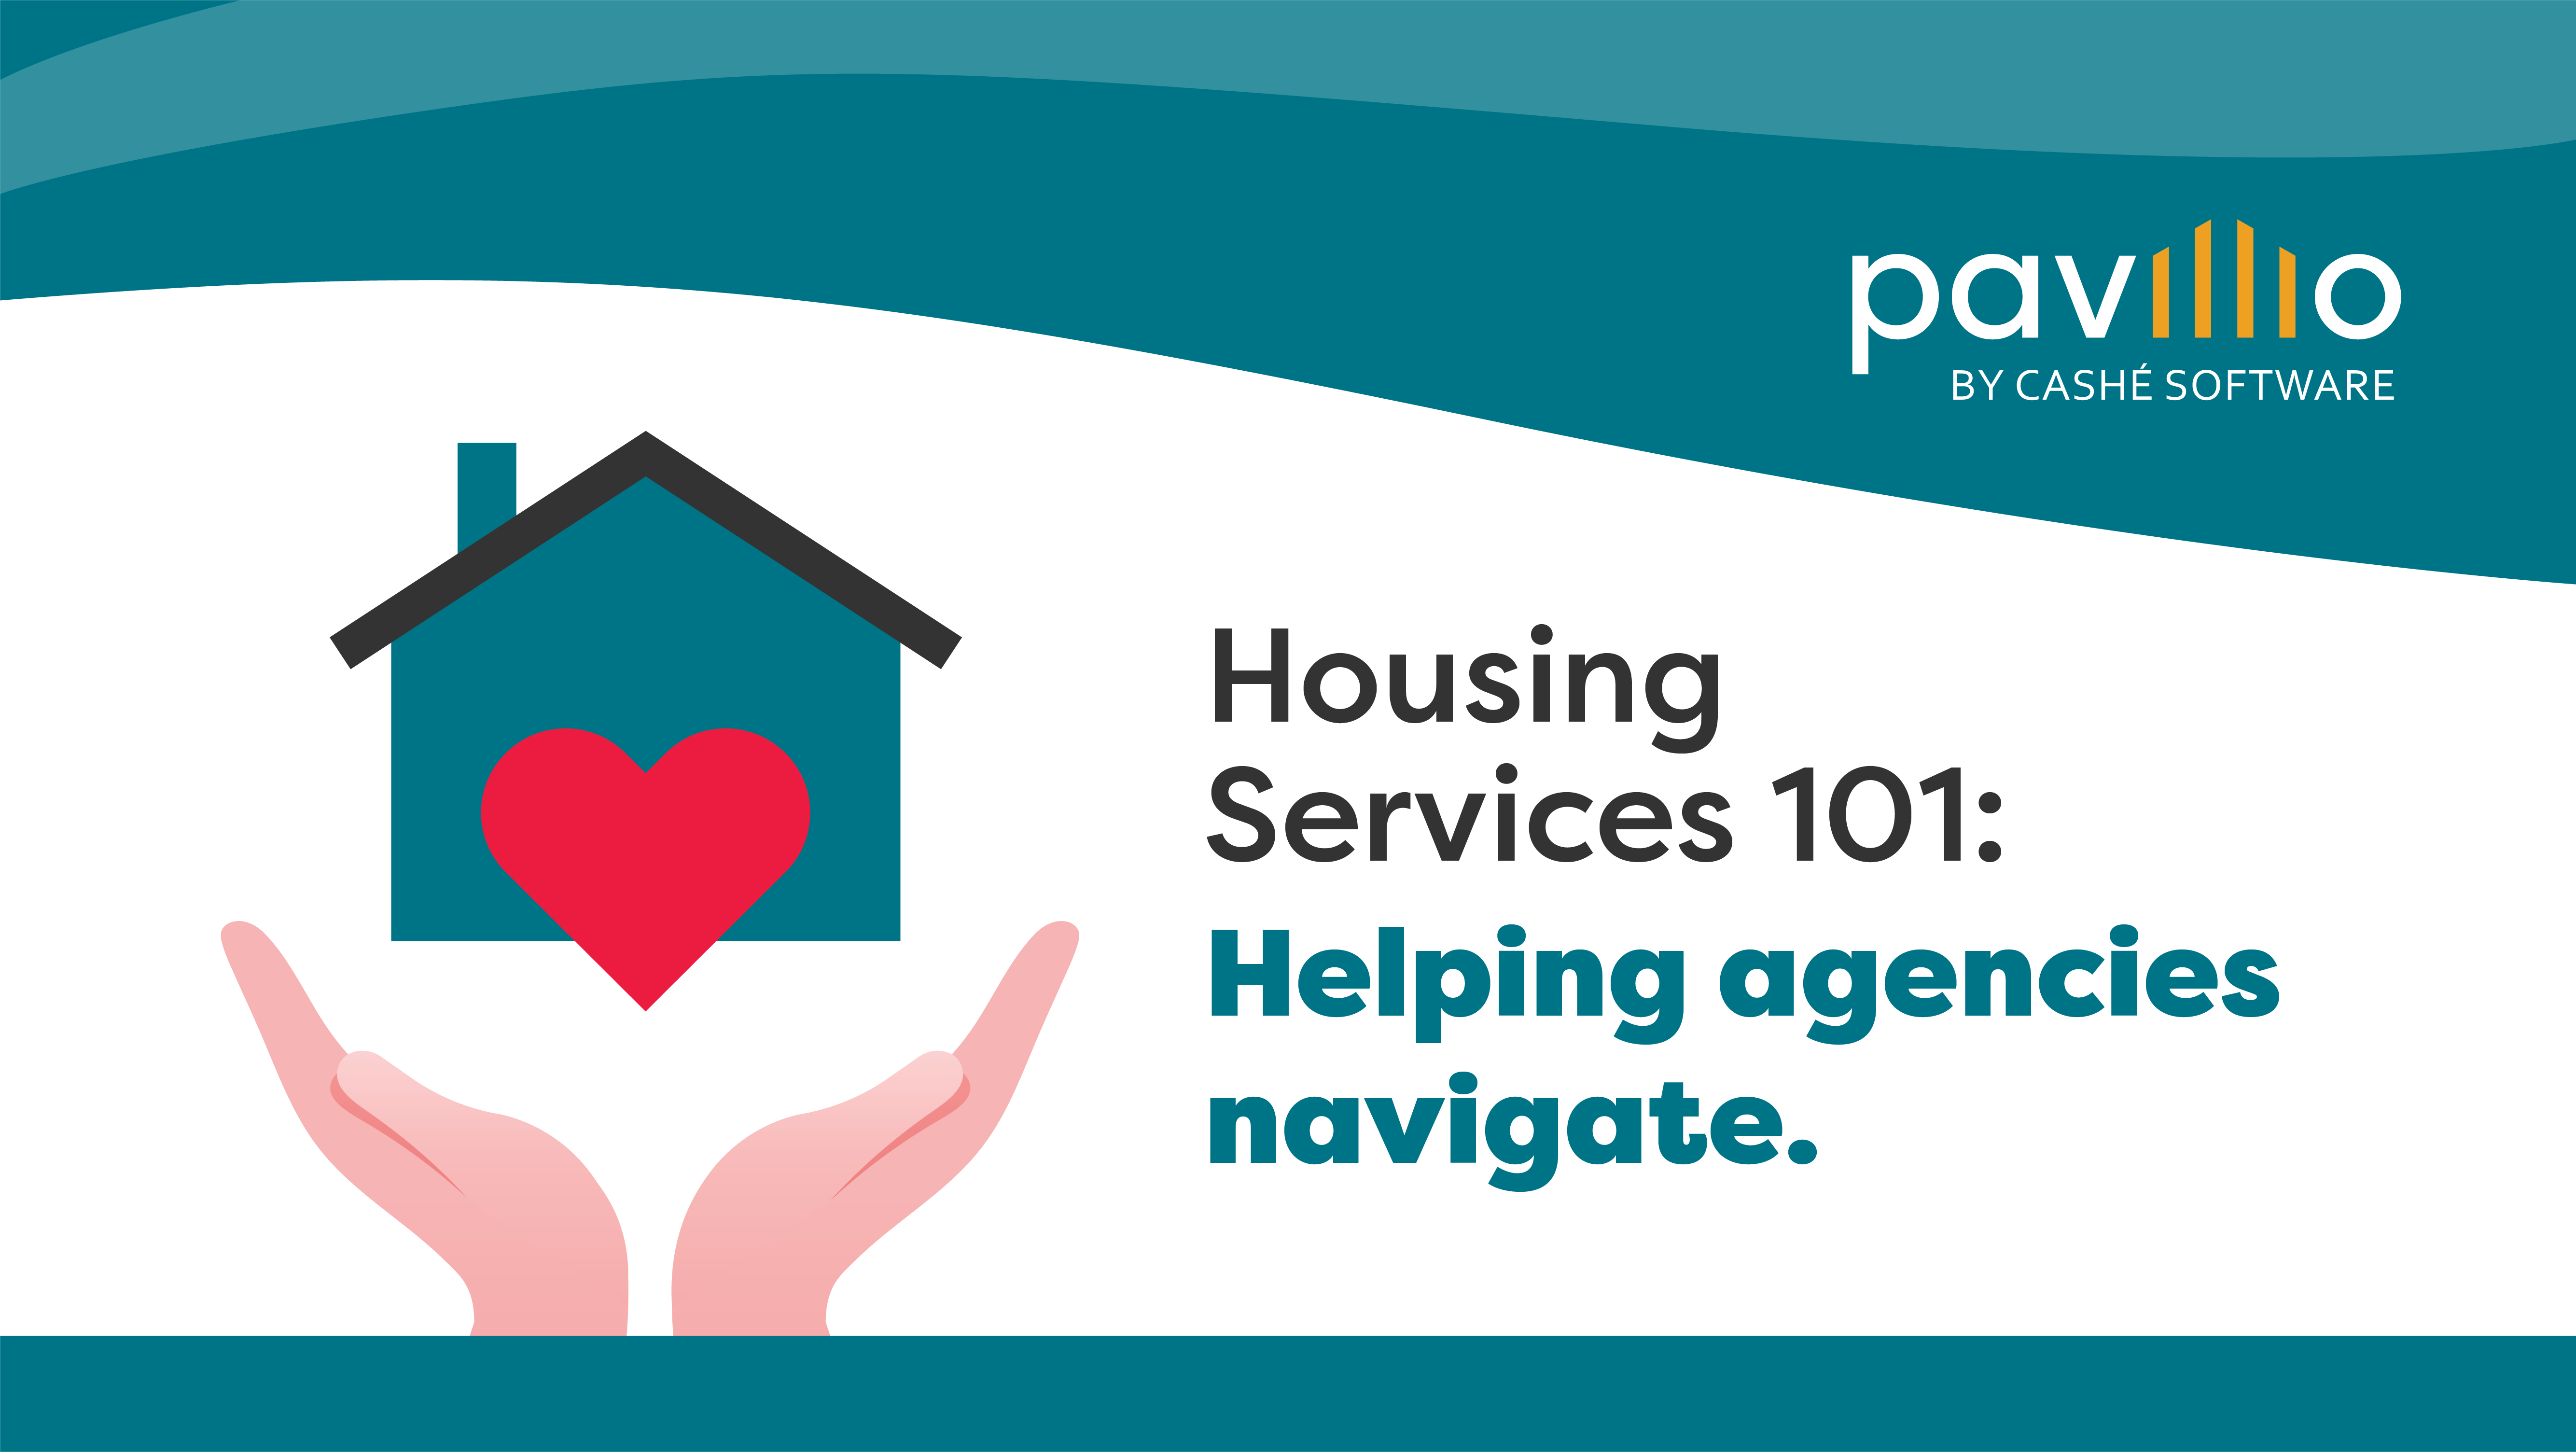 Housing Services 101 for HCBS agencies